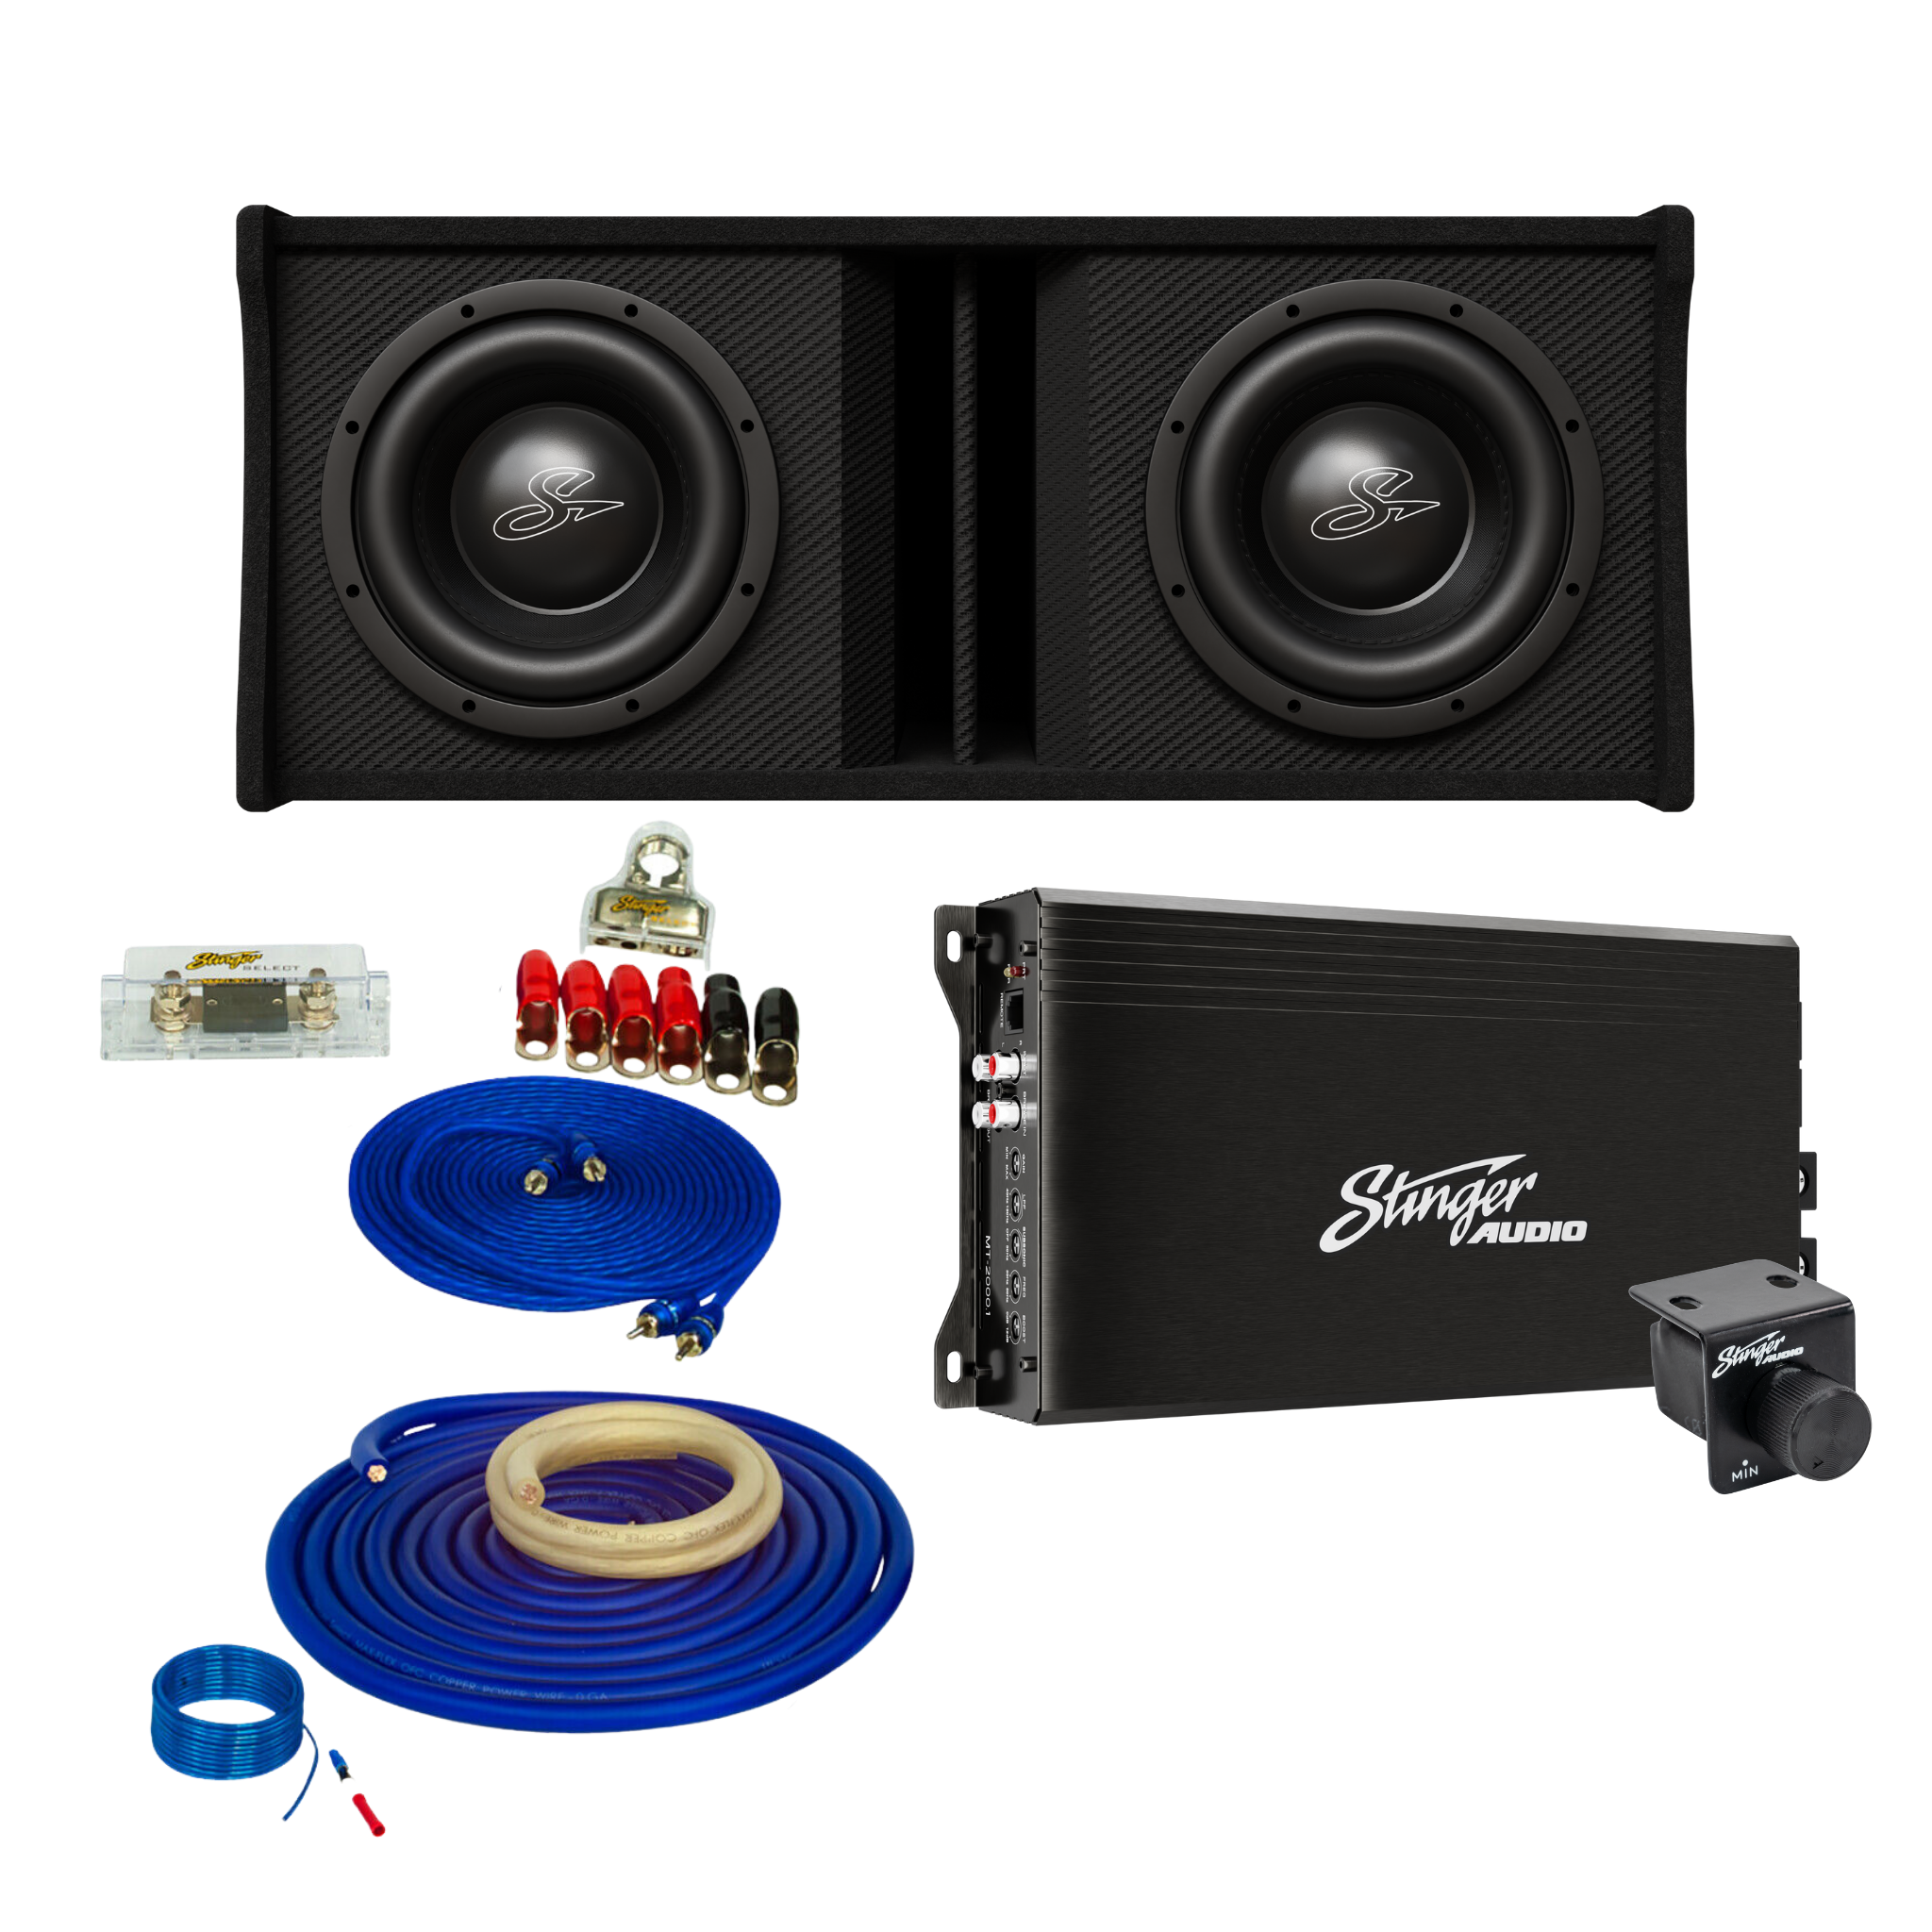 Dual 12" 2,000 Watt (RMS) Loaded Ported Subwoofer Enclosure (2,000 Watts RMS/3,000 Watts Max) Bass Package with Amplifier & Complete Wiring Kit